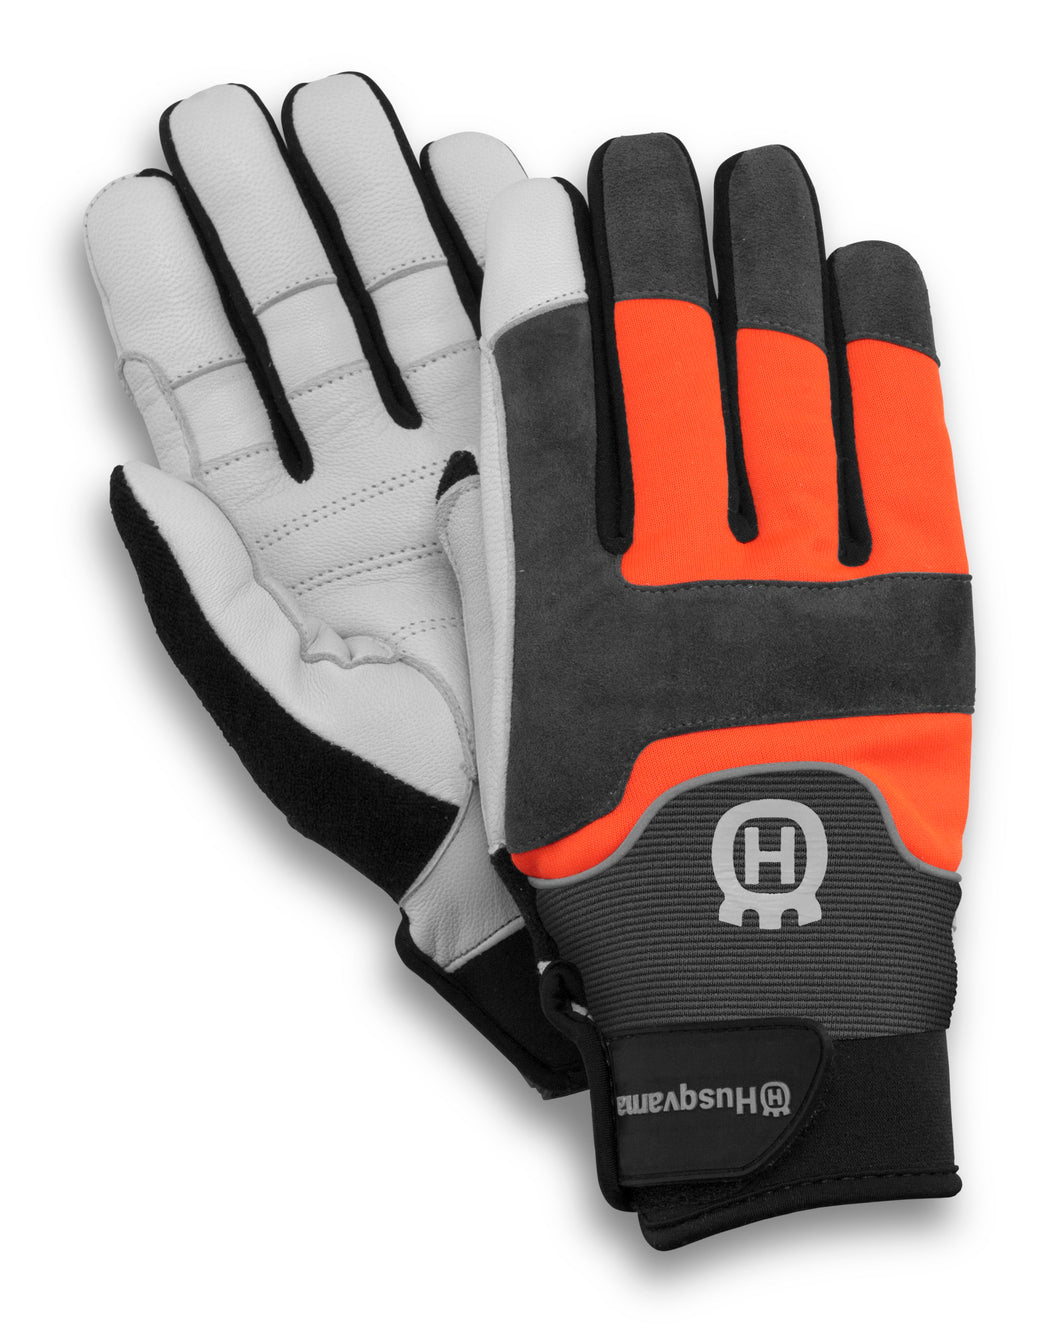 Husqvarna Technical Gloves - Without Saw Protection